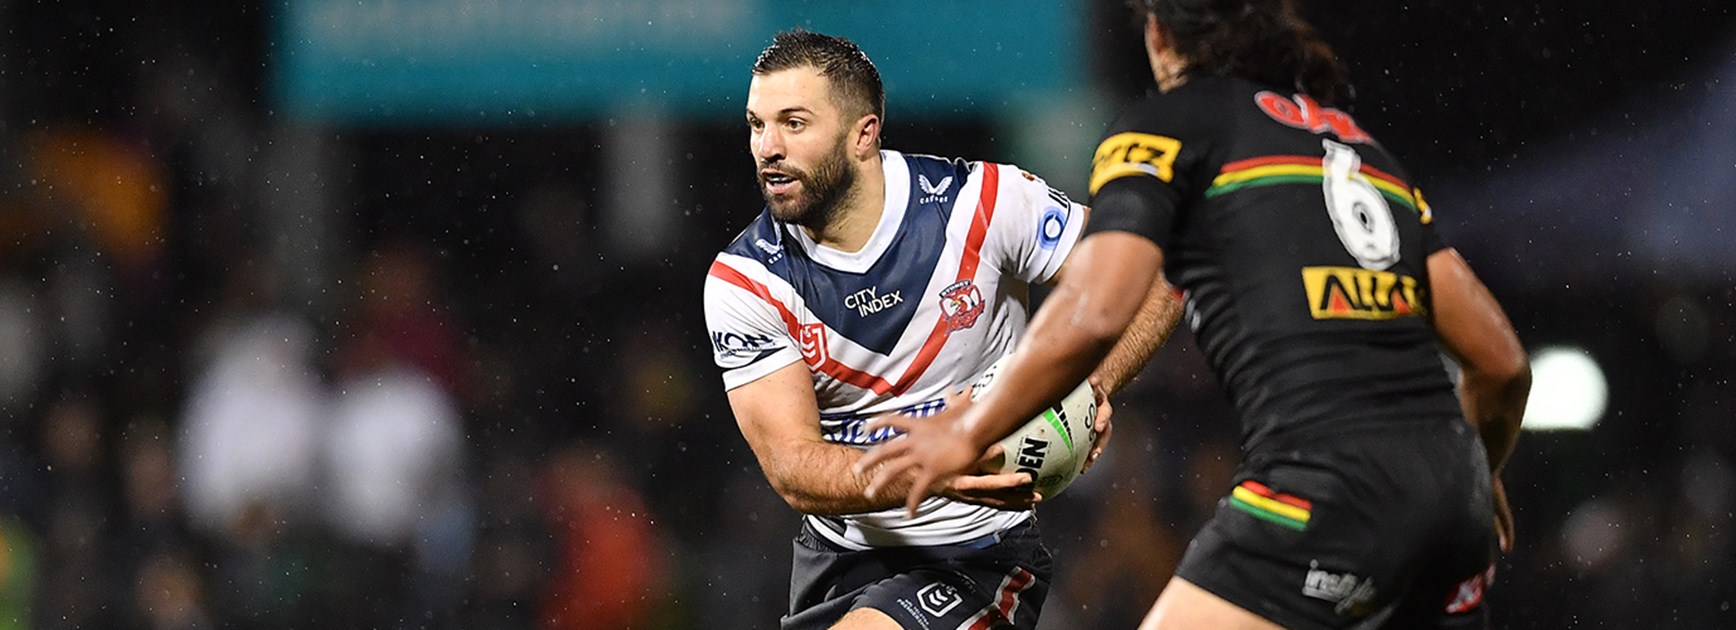 Opposition Teamlist: Sydney Roosters